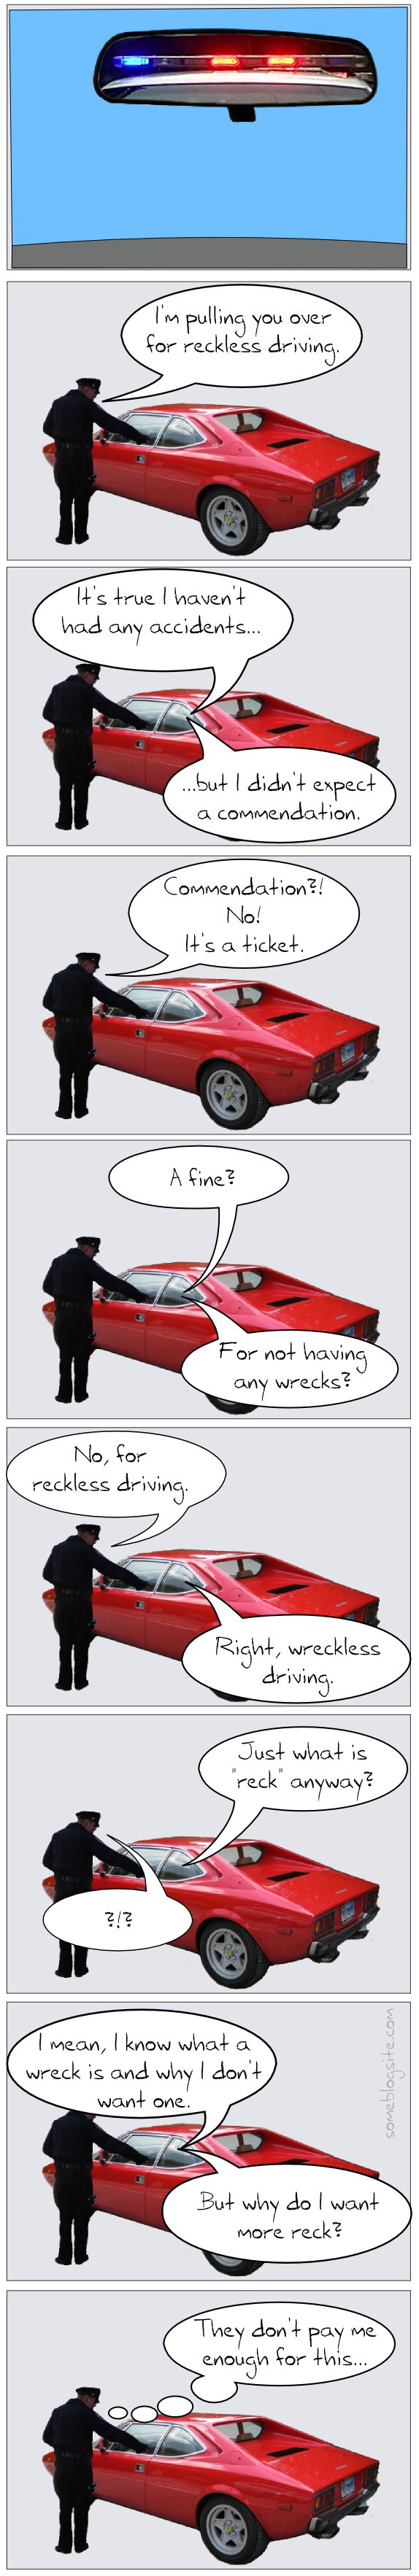 comic of a person being pulled over by the police for reckless driving but they confuse it with wreckless driving; hilarity ensues.